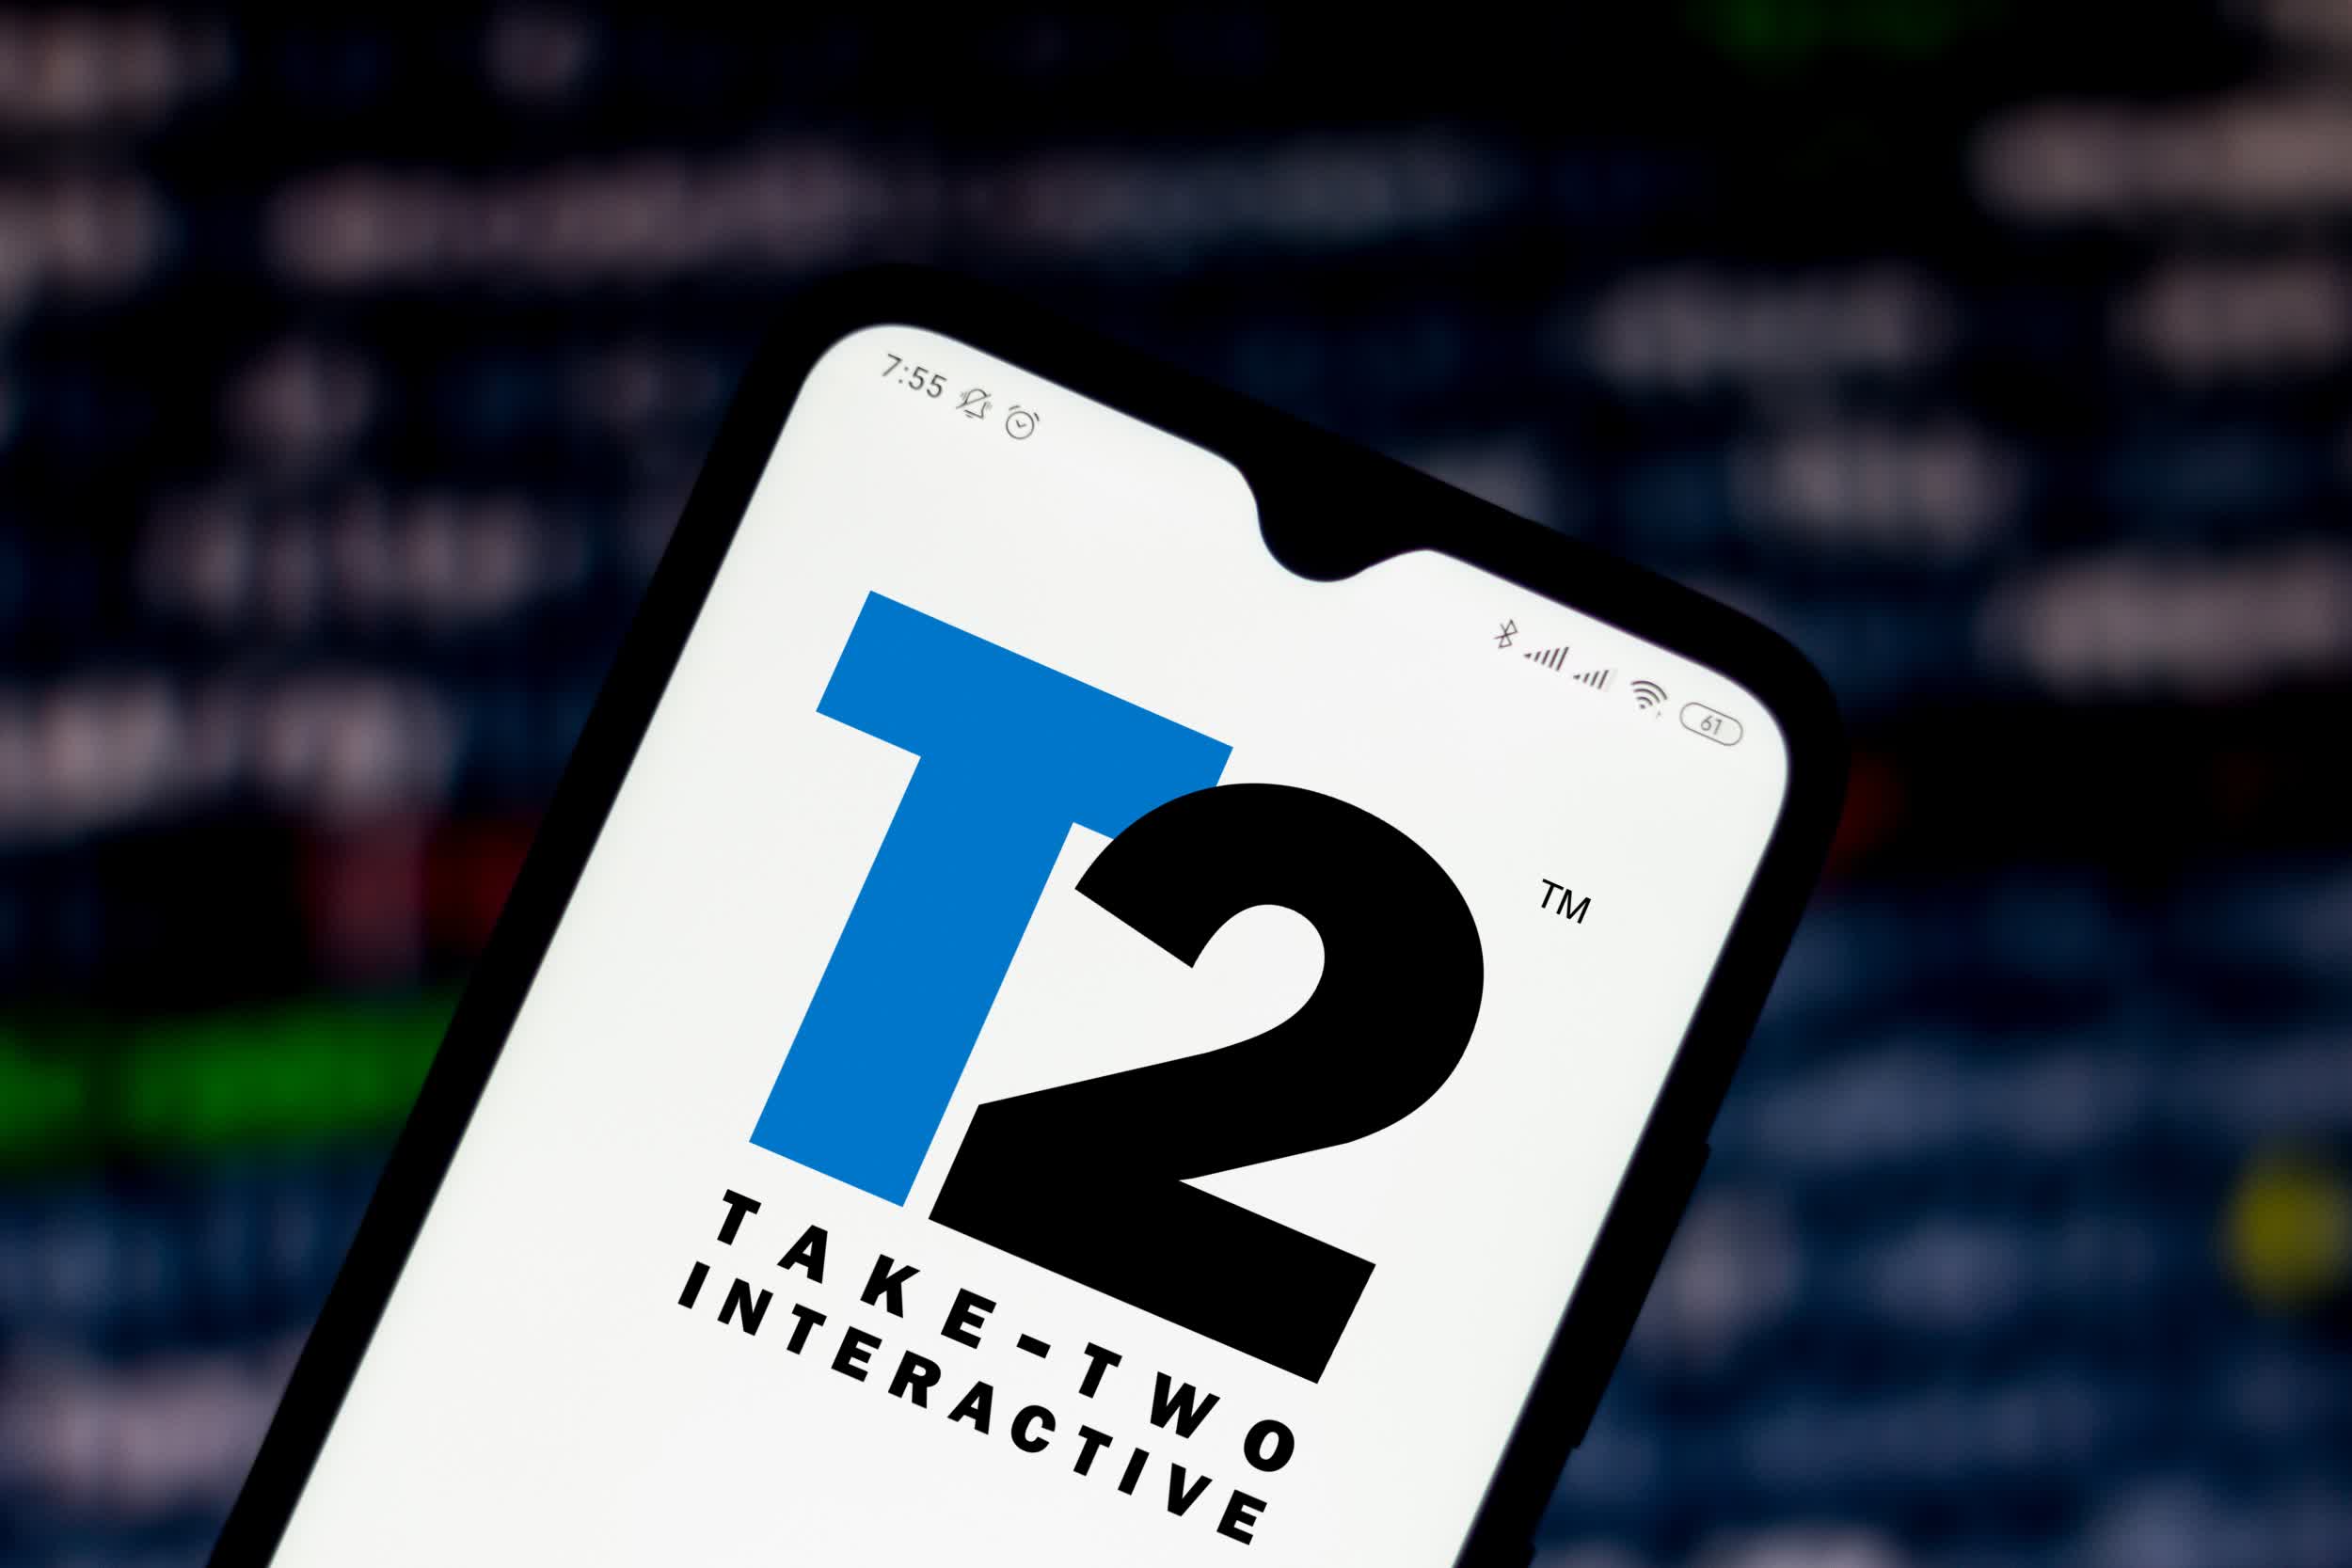 Take-Two Interactive is in talks to acquire Codemasters